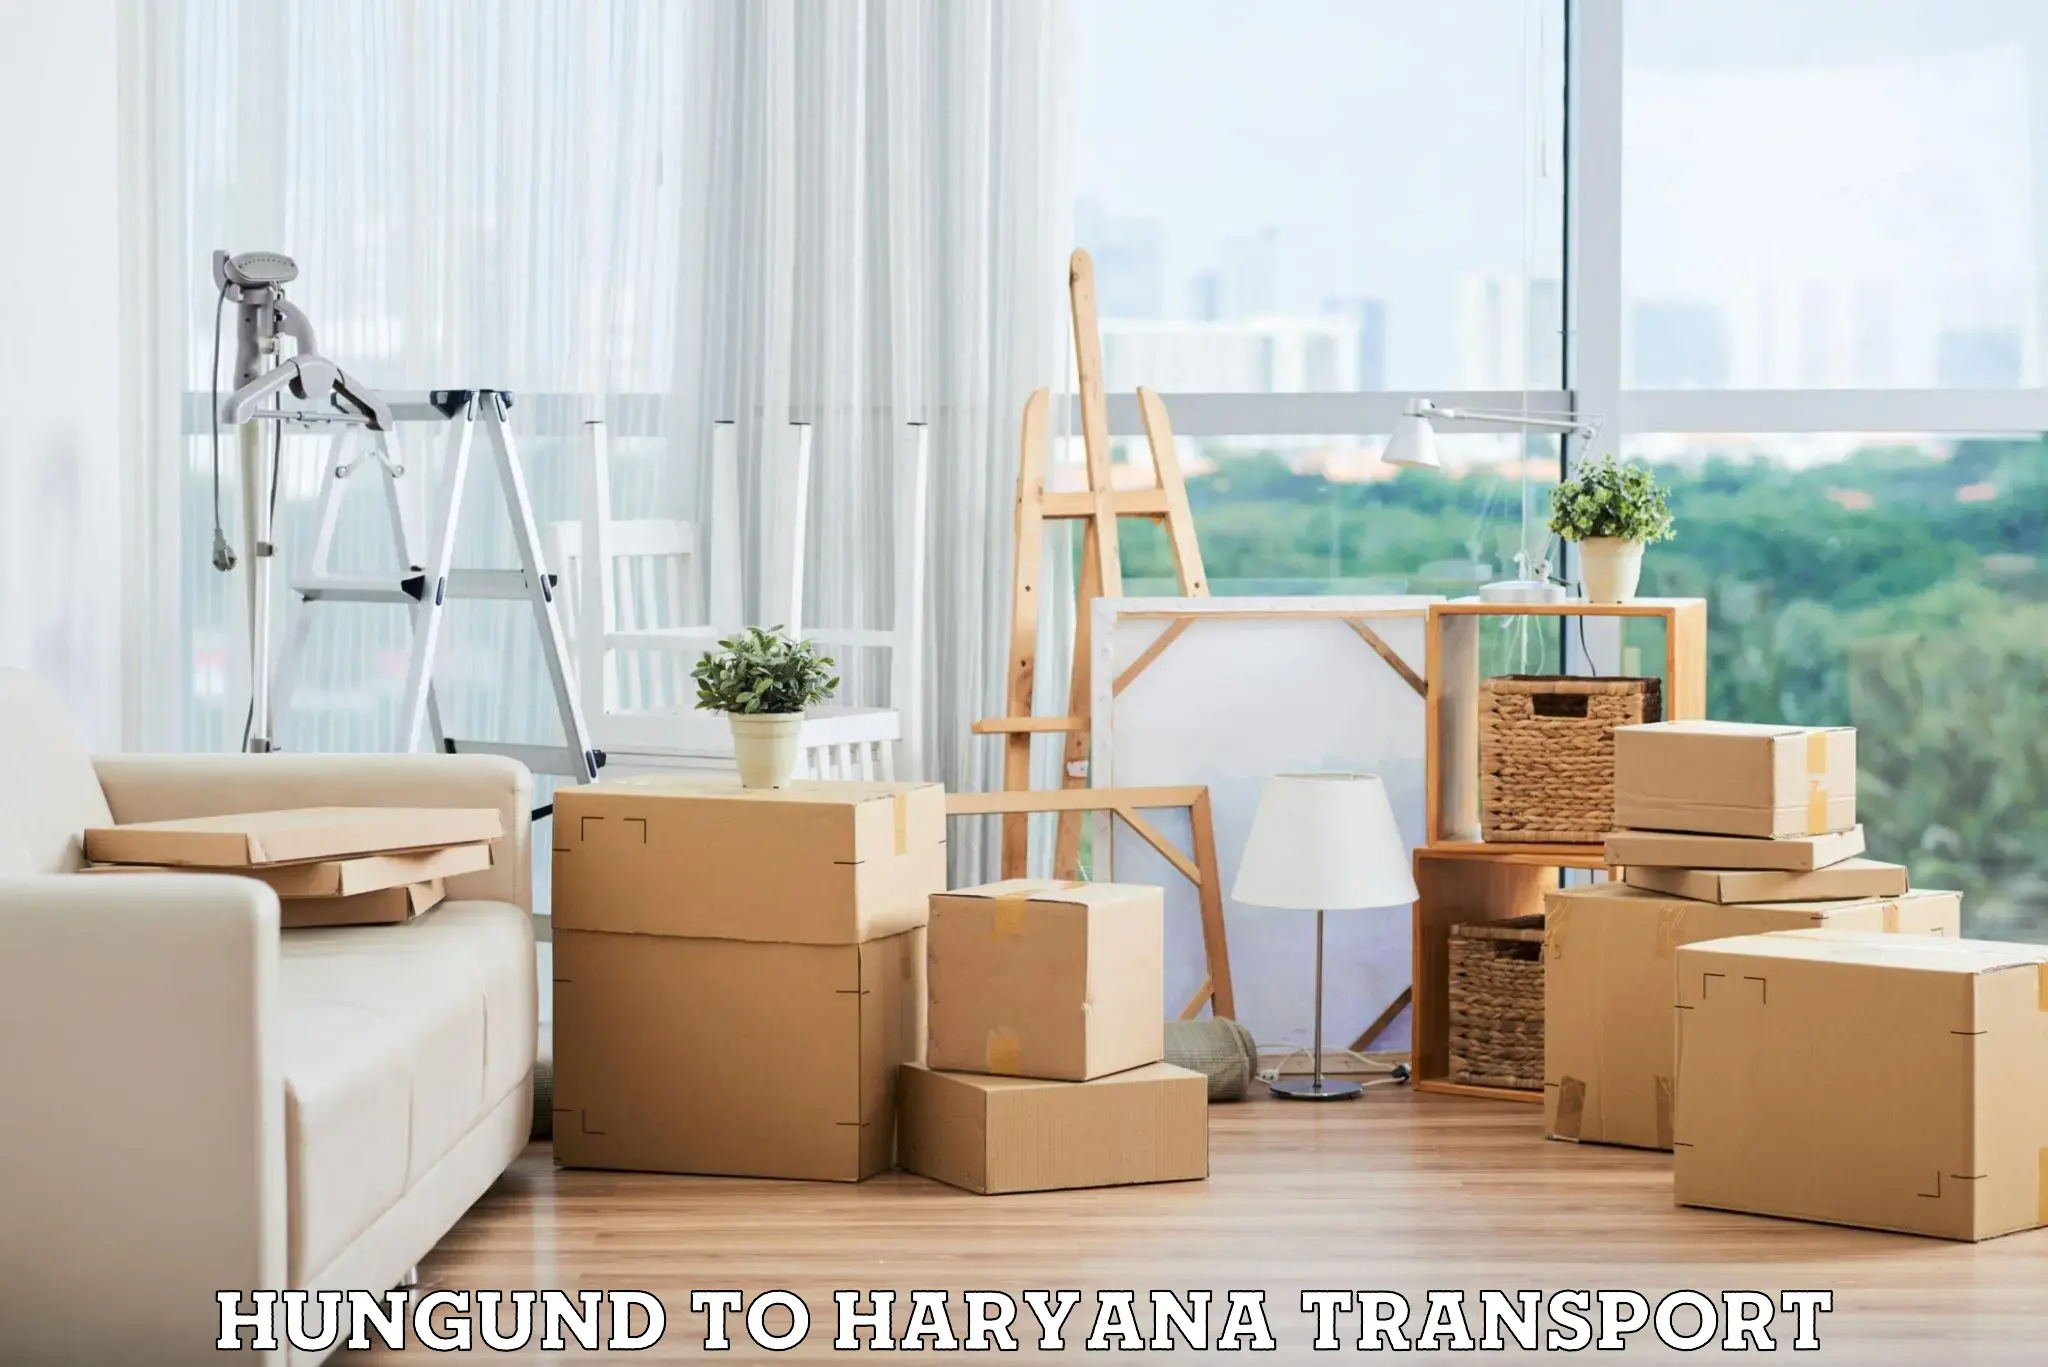 Delivery service Hungund to Haryana